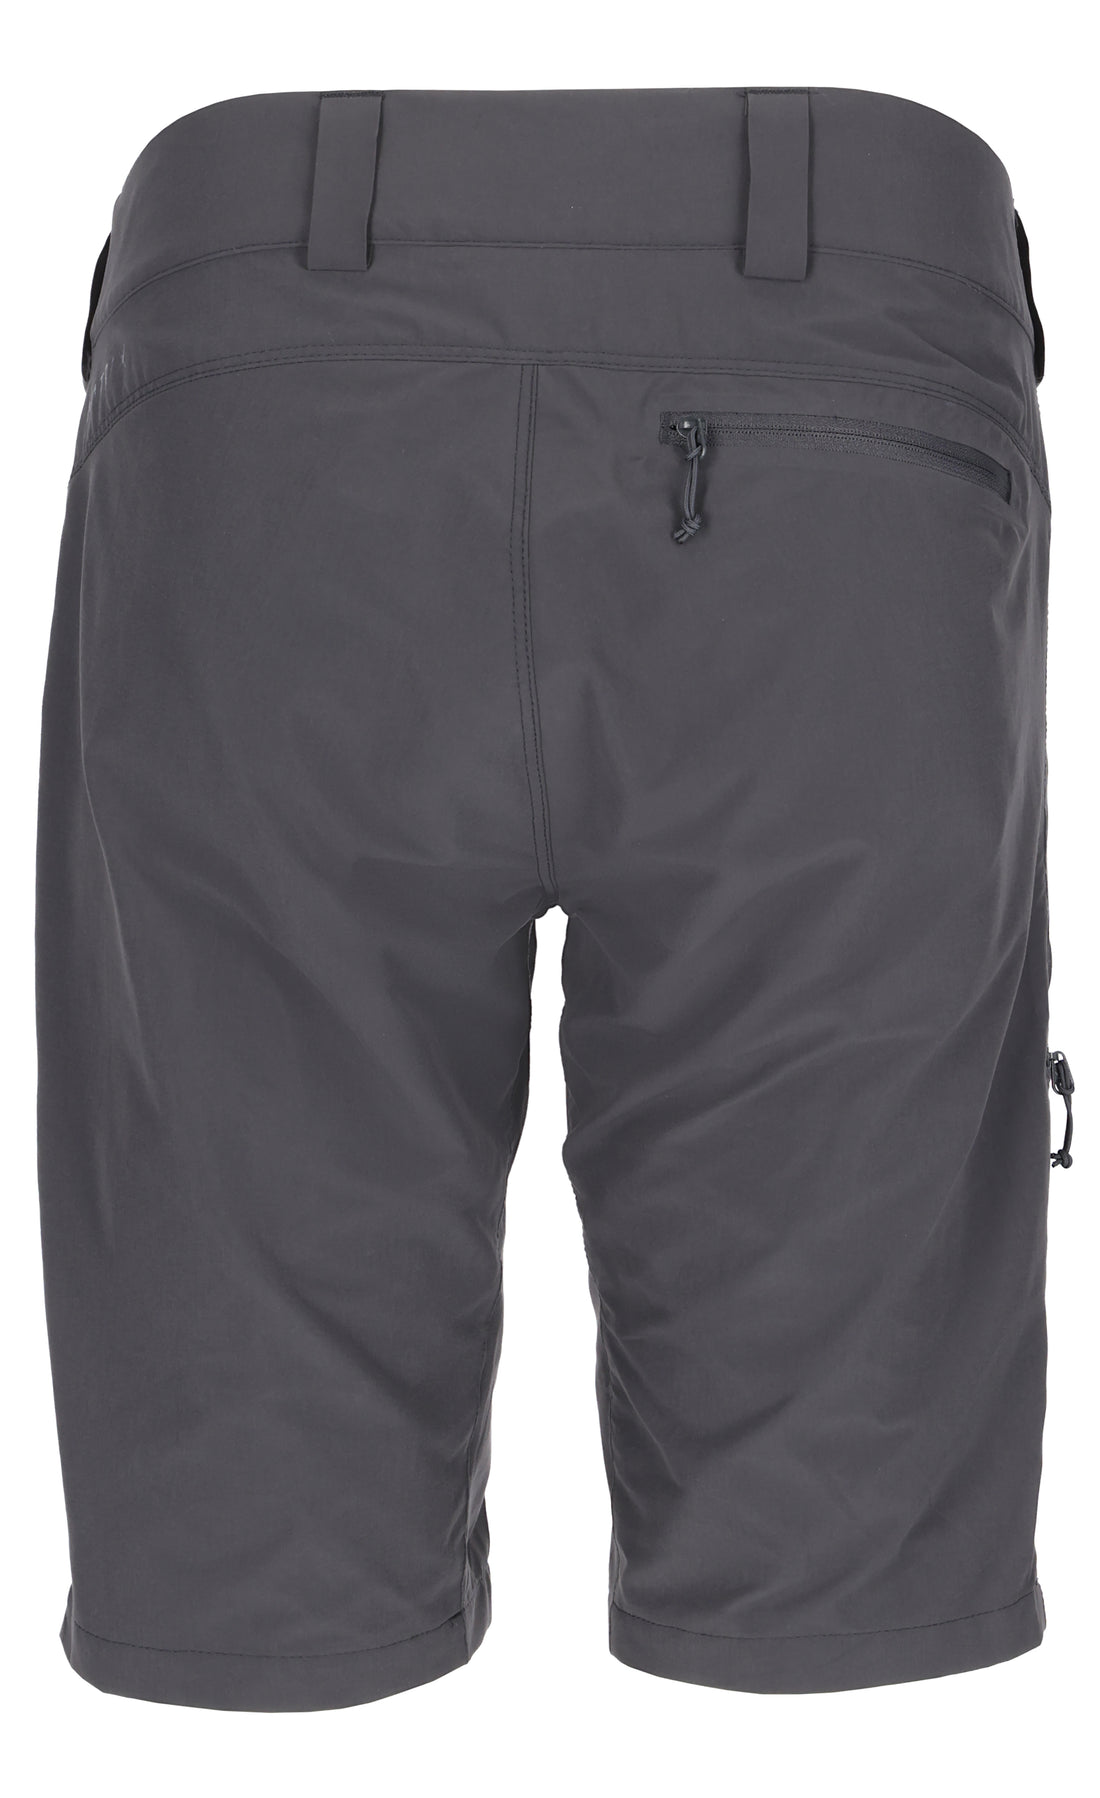 Incline Light Shorts - Anthracite